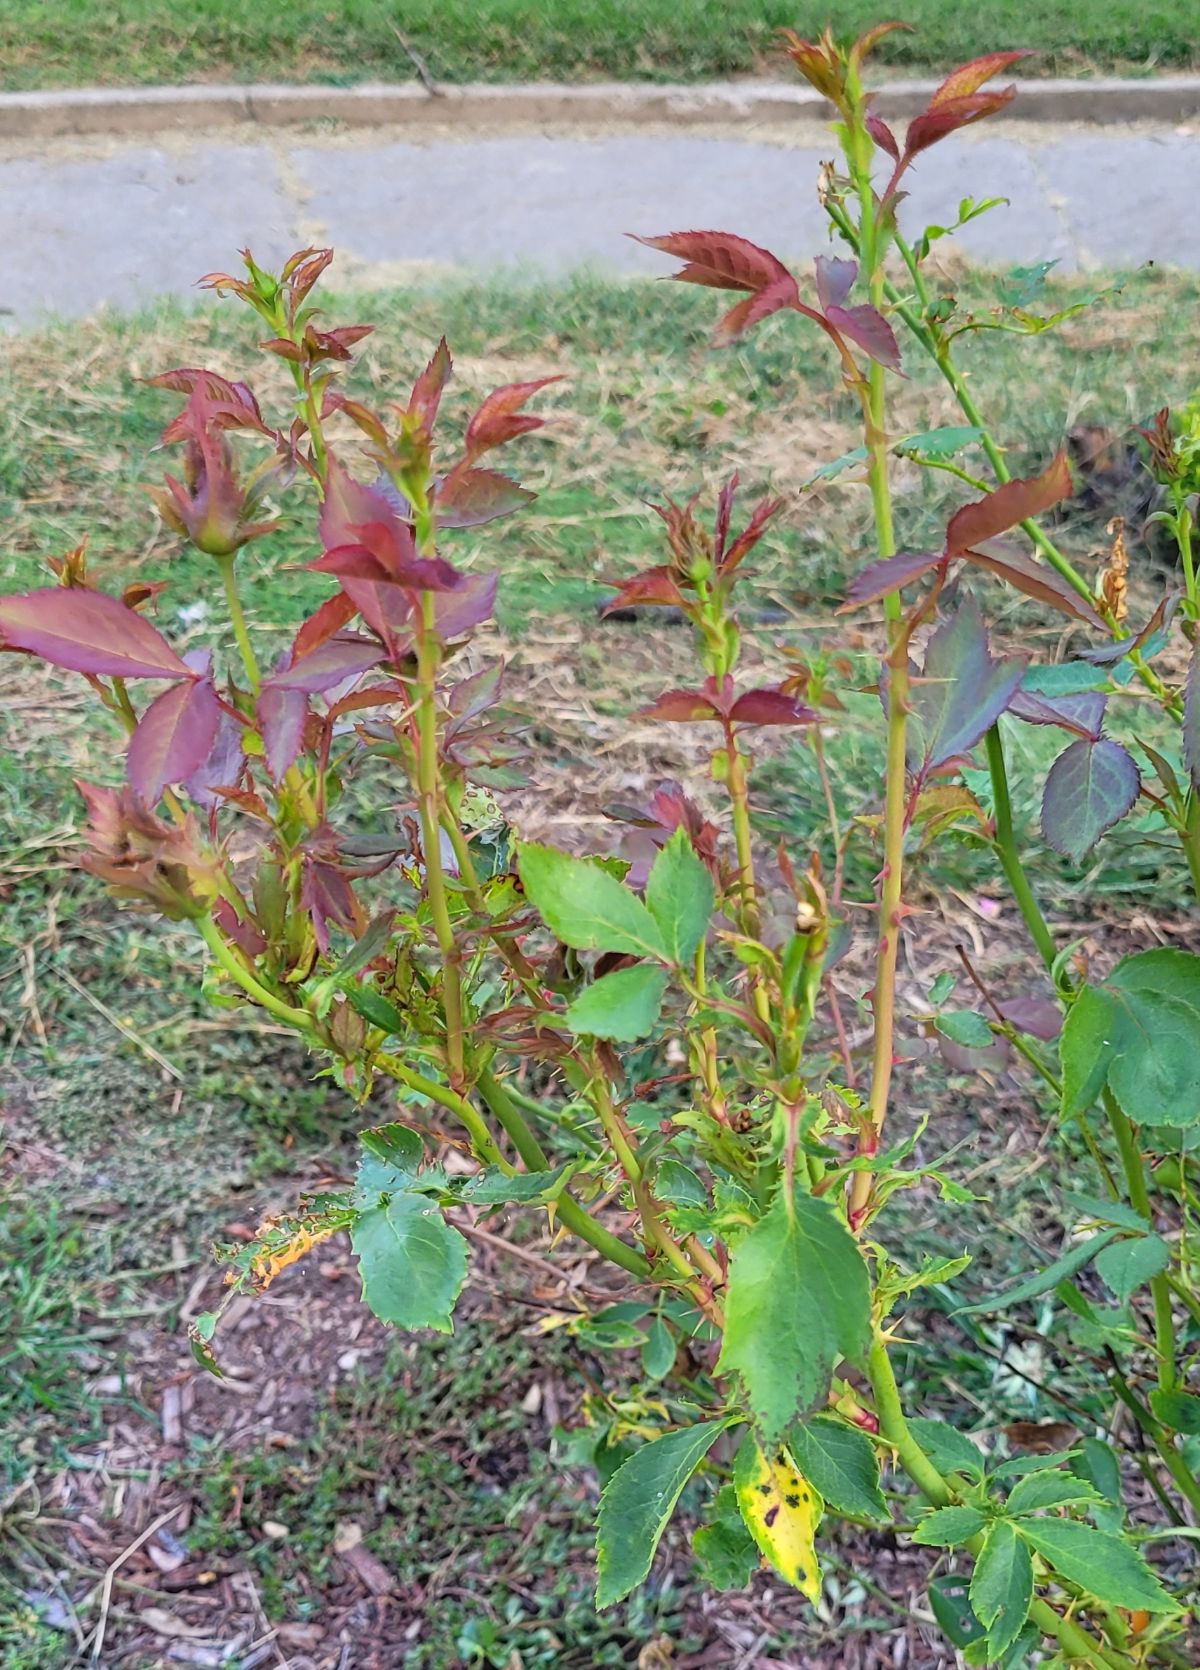 Long canes a sign of rose rosette disease